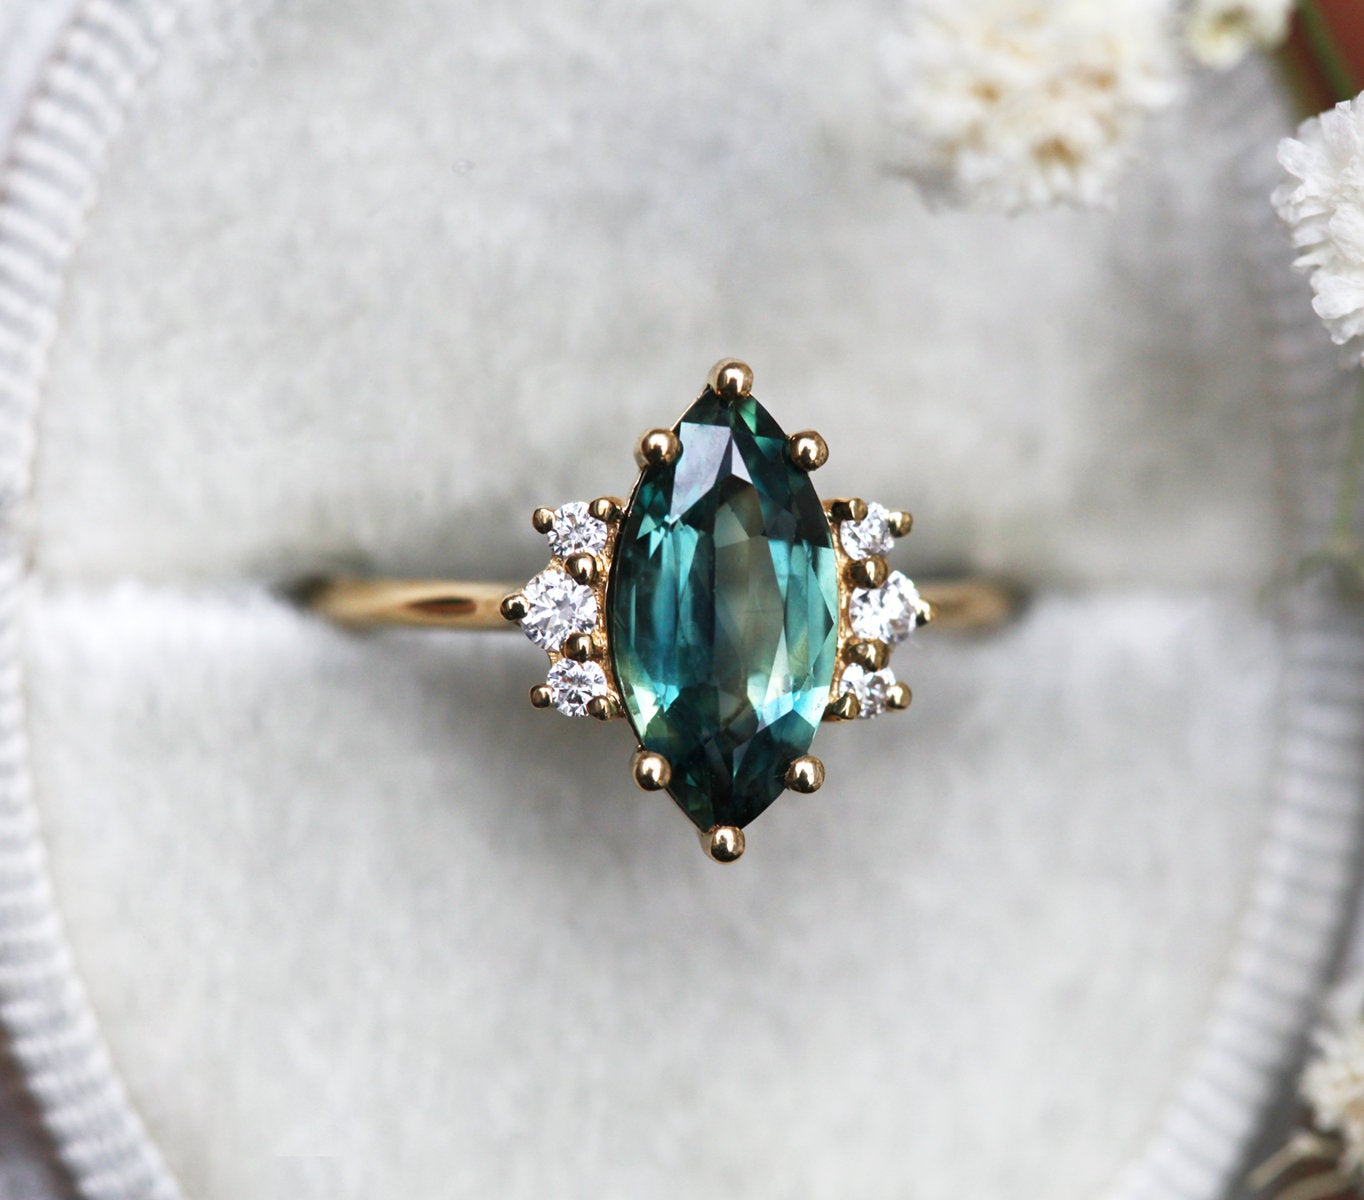 Marquise-cut teal sapphire cluster ring with white diamonds